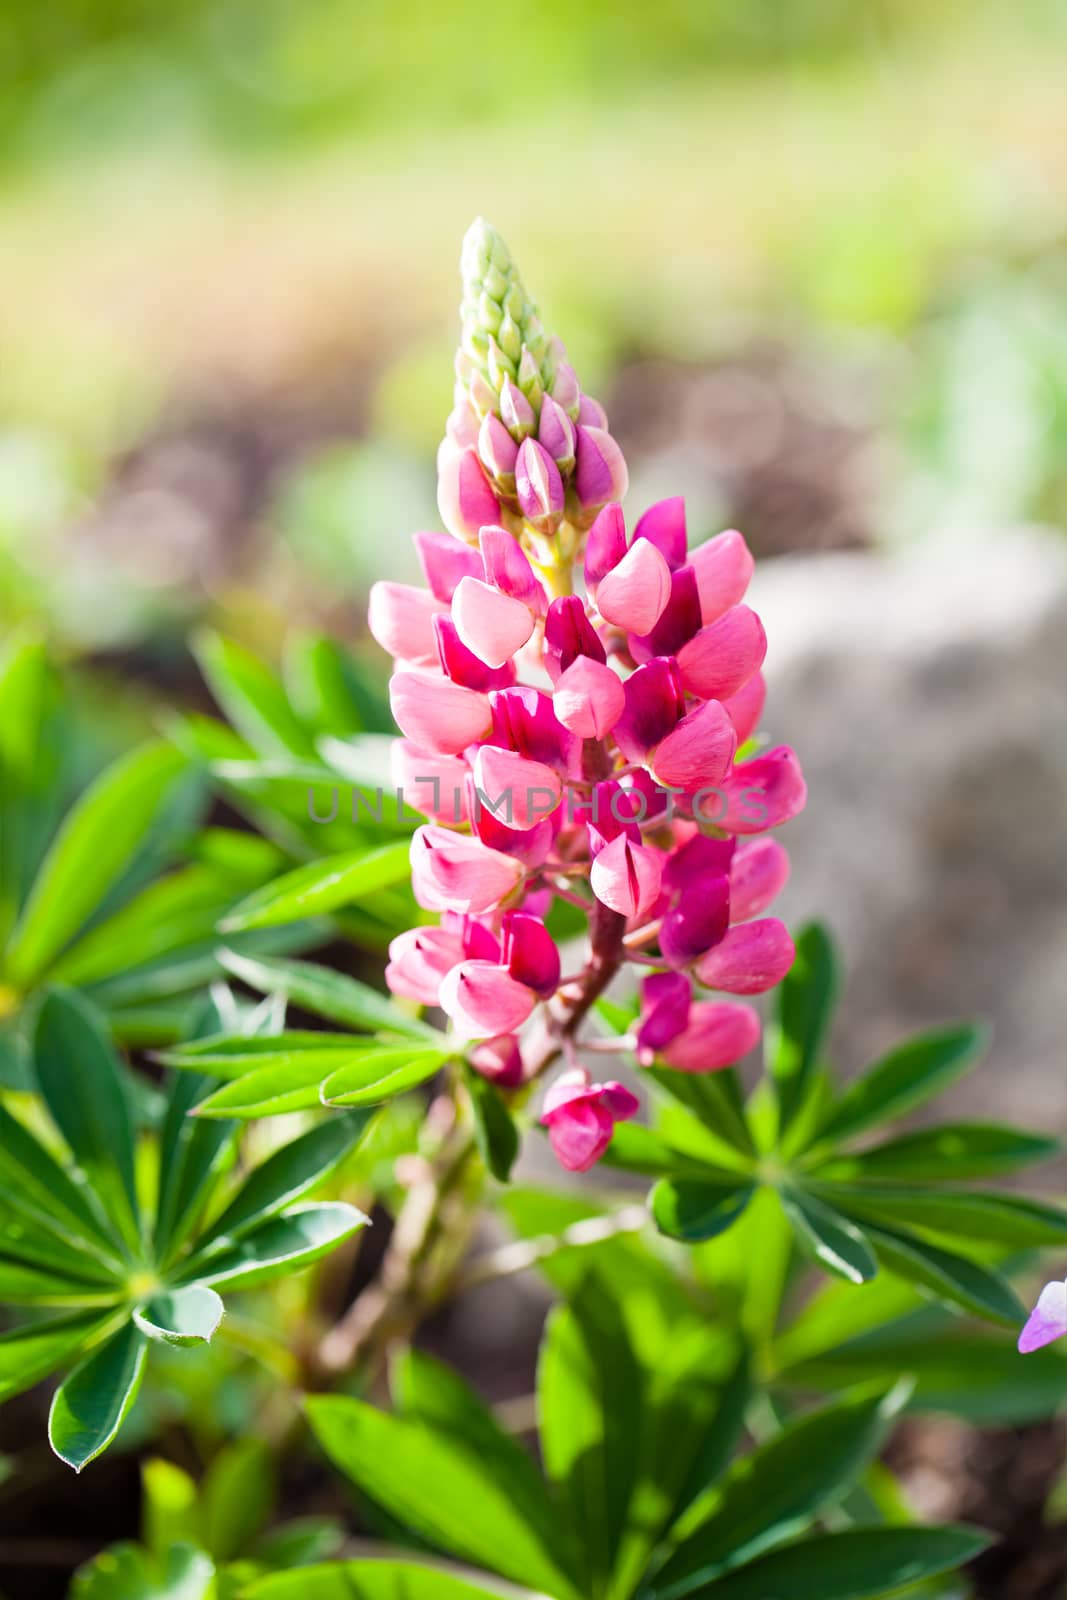 Rare pink Lupin flower (Lupinus) in the summer